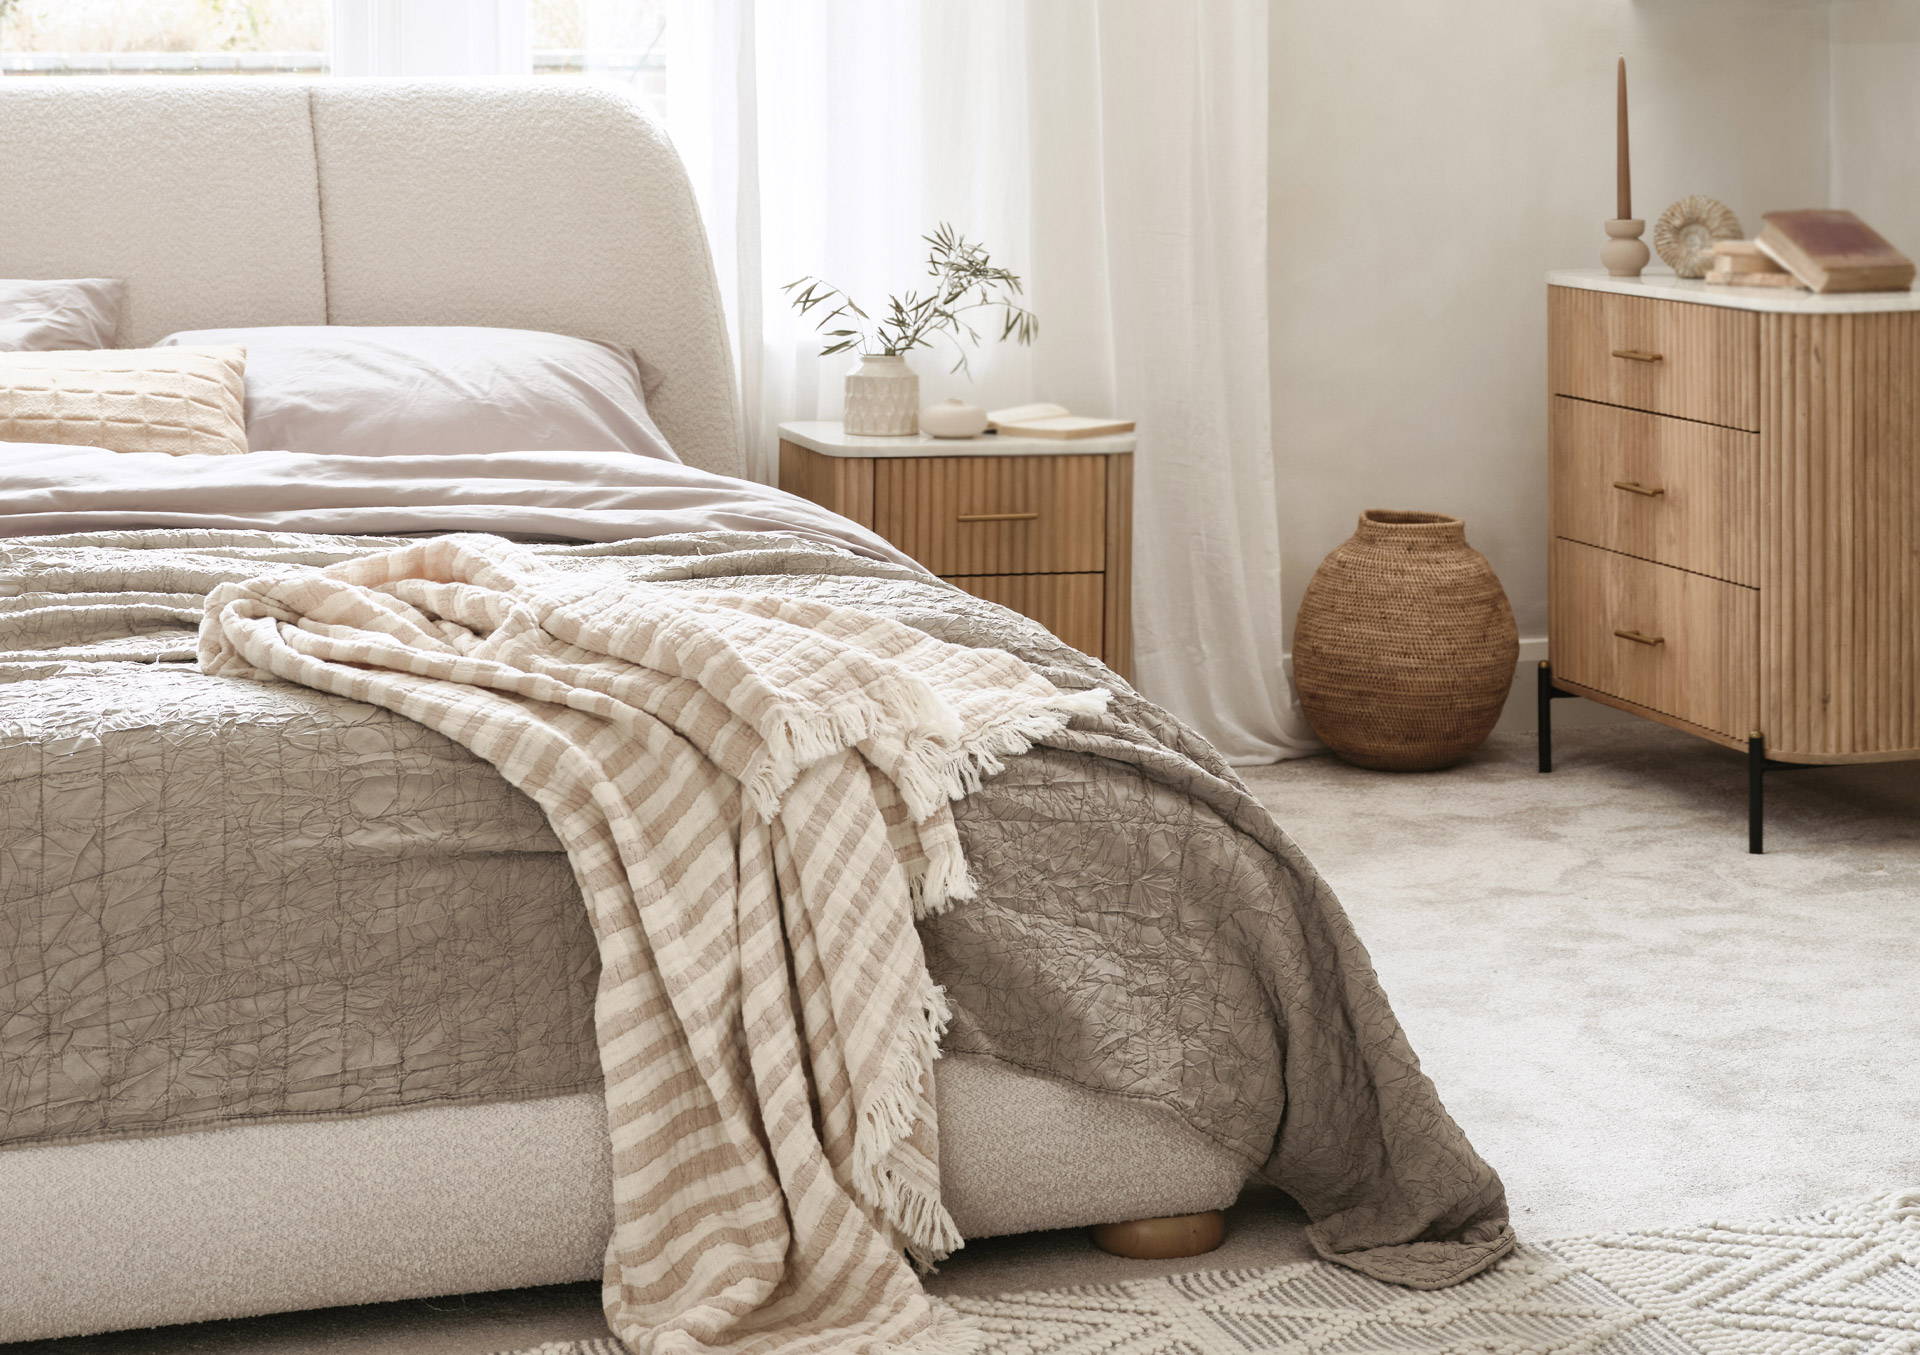 Upholstered Beds And Bedframes In Norwich - Add A Mattress From Our Forty Winks Collection